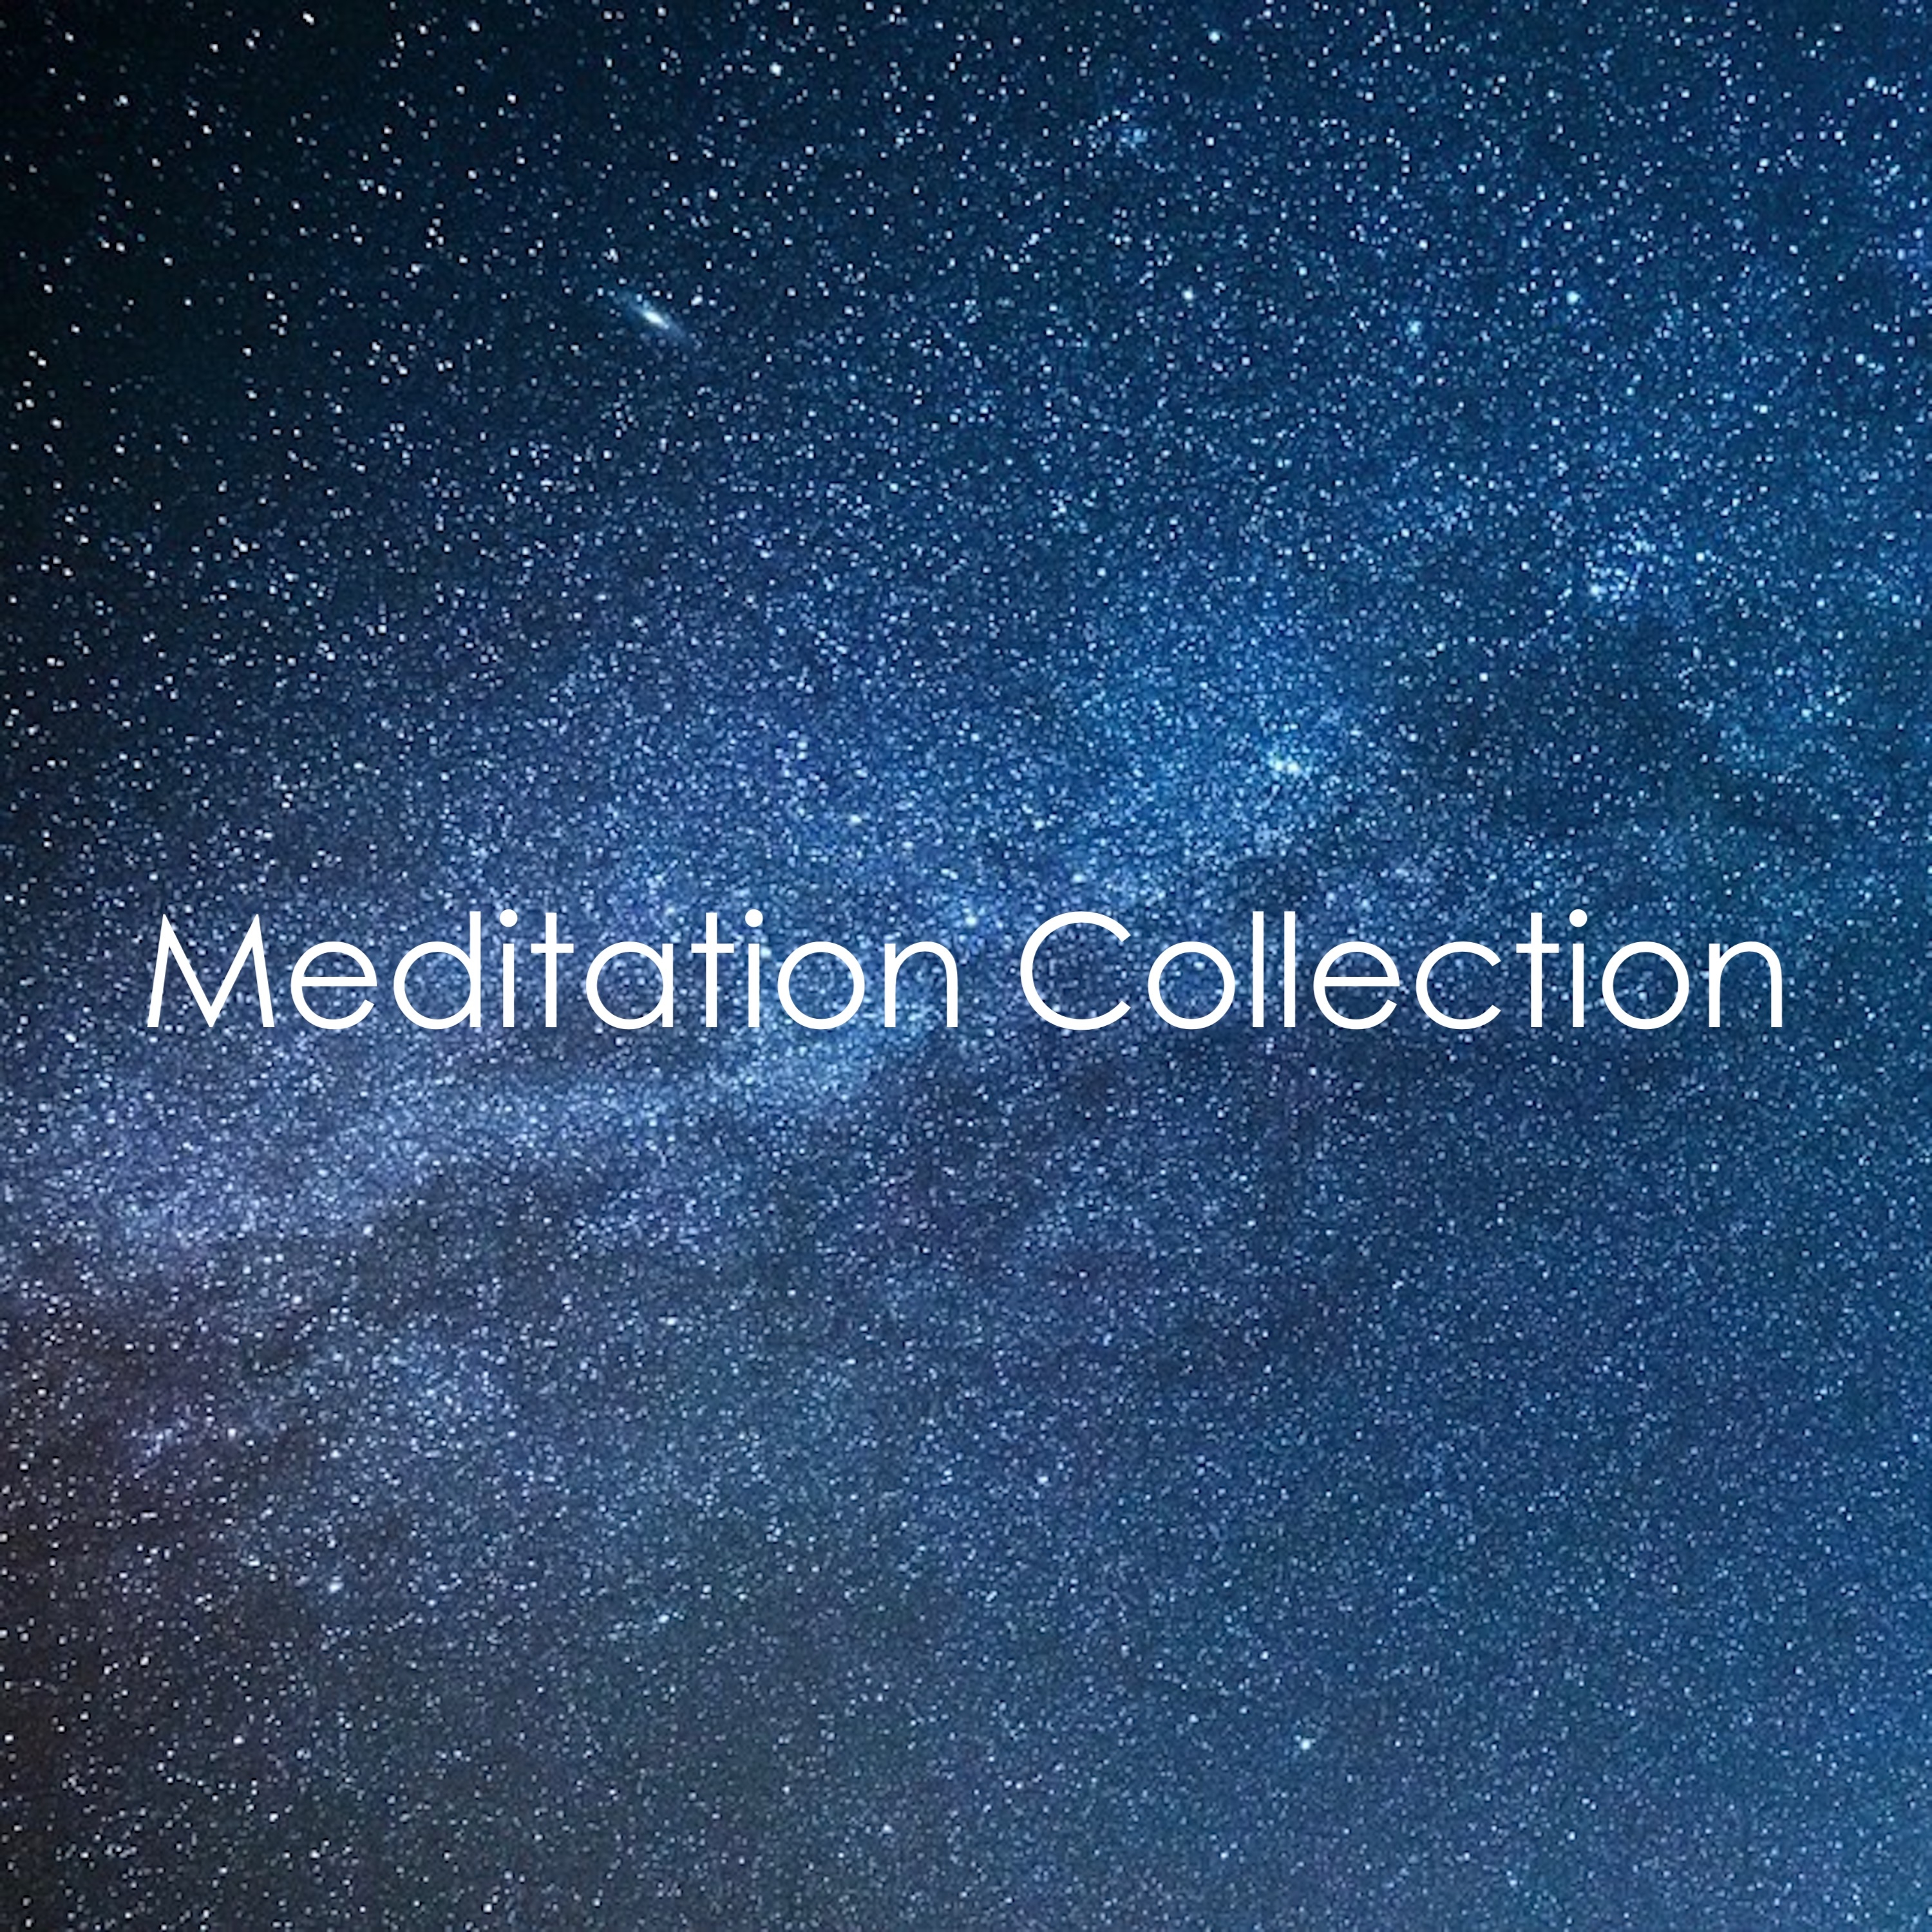 #2018 Meditation Collection: Compilation of Meditation Sounds, Nature Sounds for Zen, Spa, Relaxation